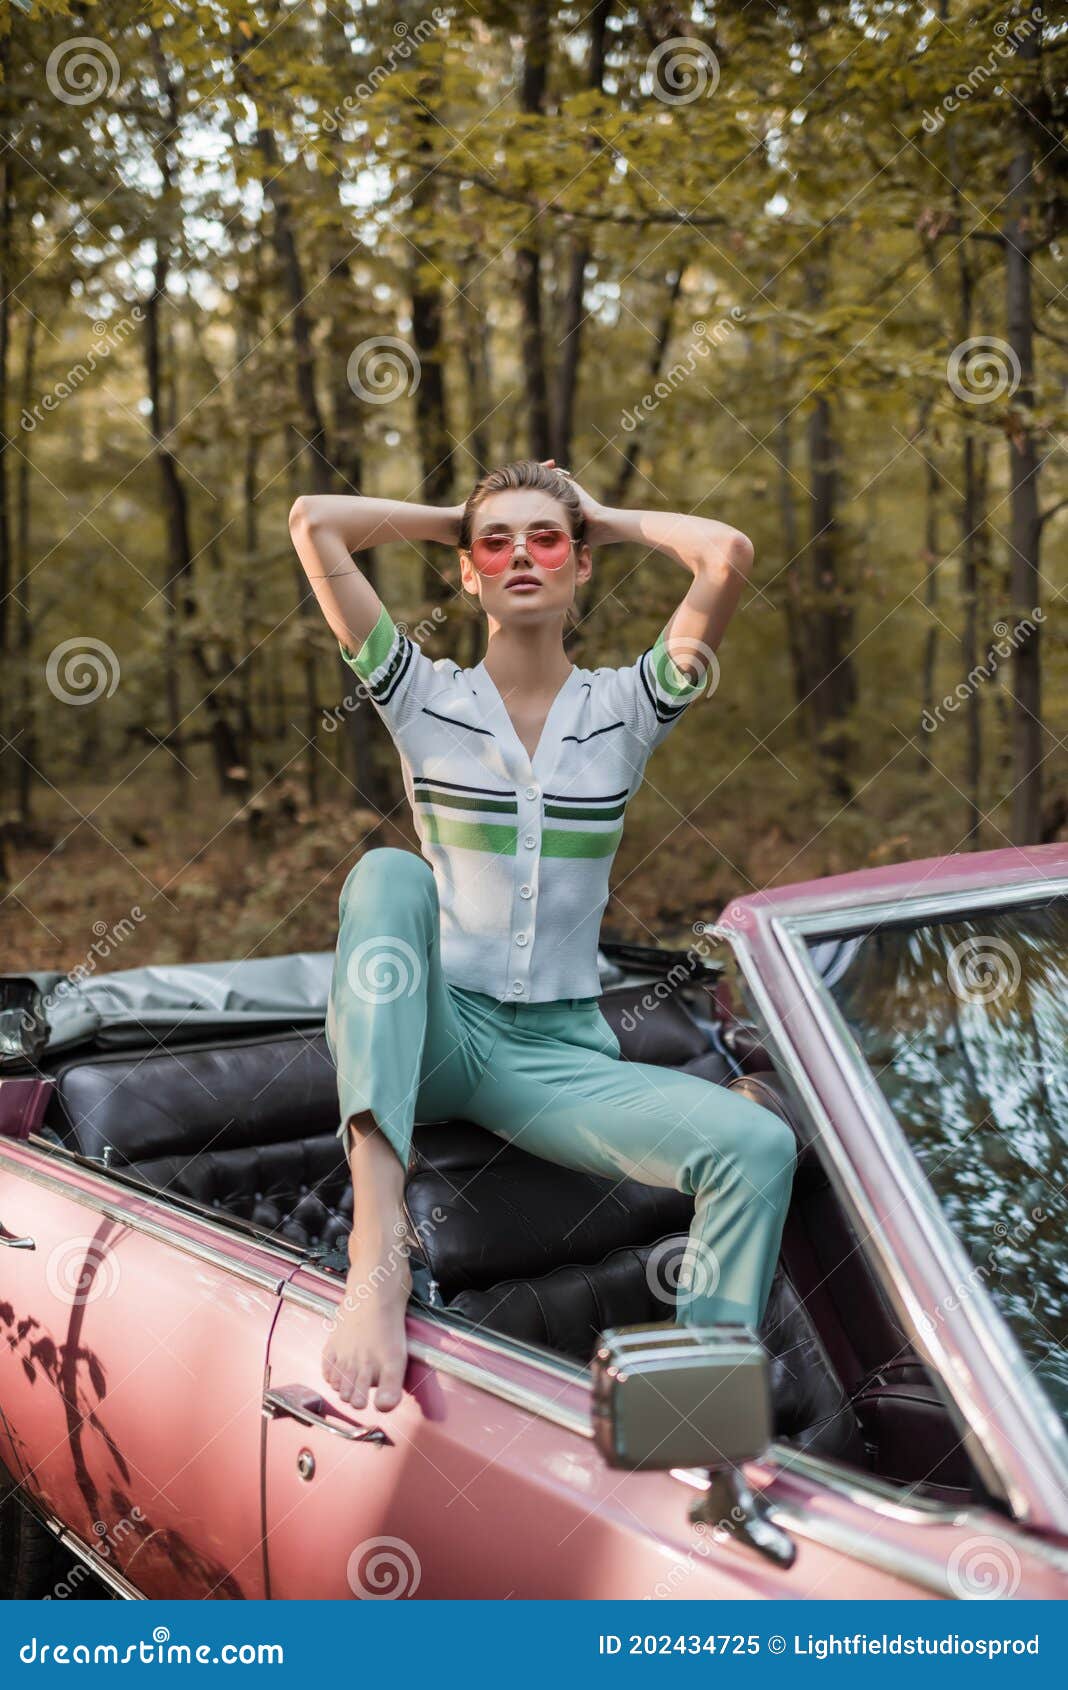 https://thumbs.dreamstime.com/z/barefoot-woman-posing-vintage-cabriolet-stylish-barefoot-woman-posing-vintage-cabriolet-hands-behind-head-202434725.jpg